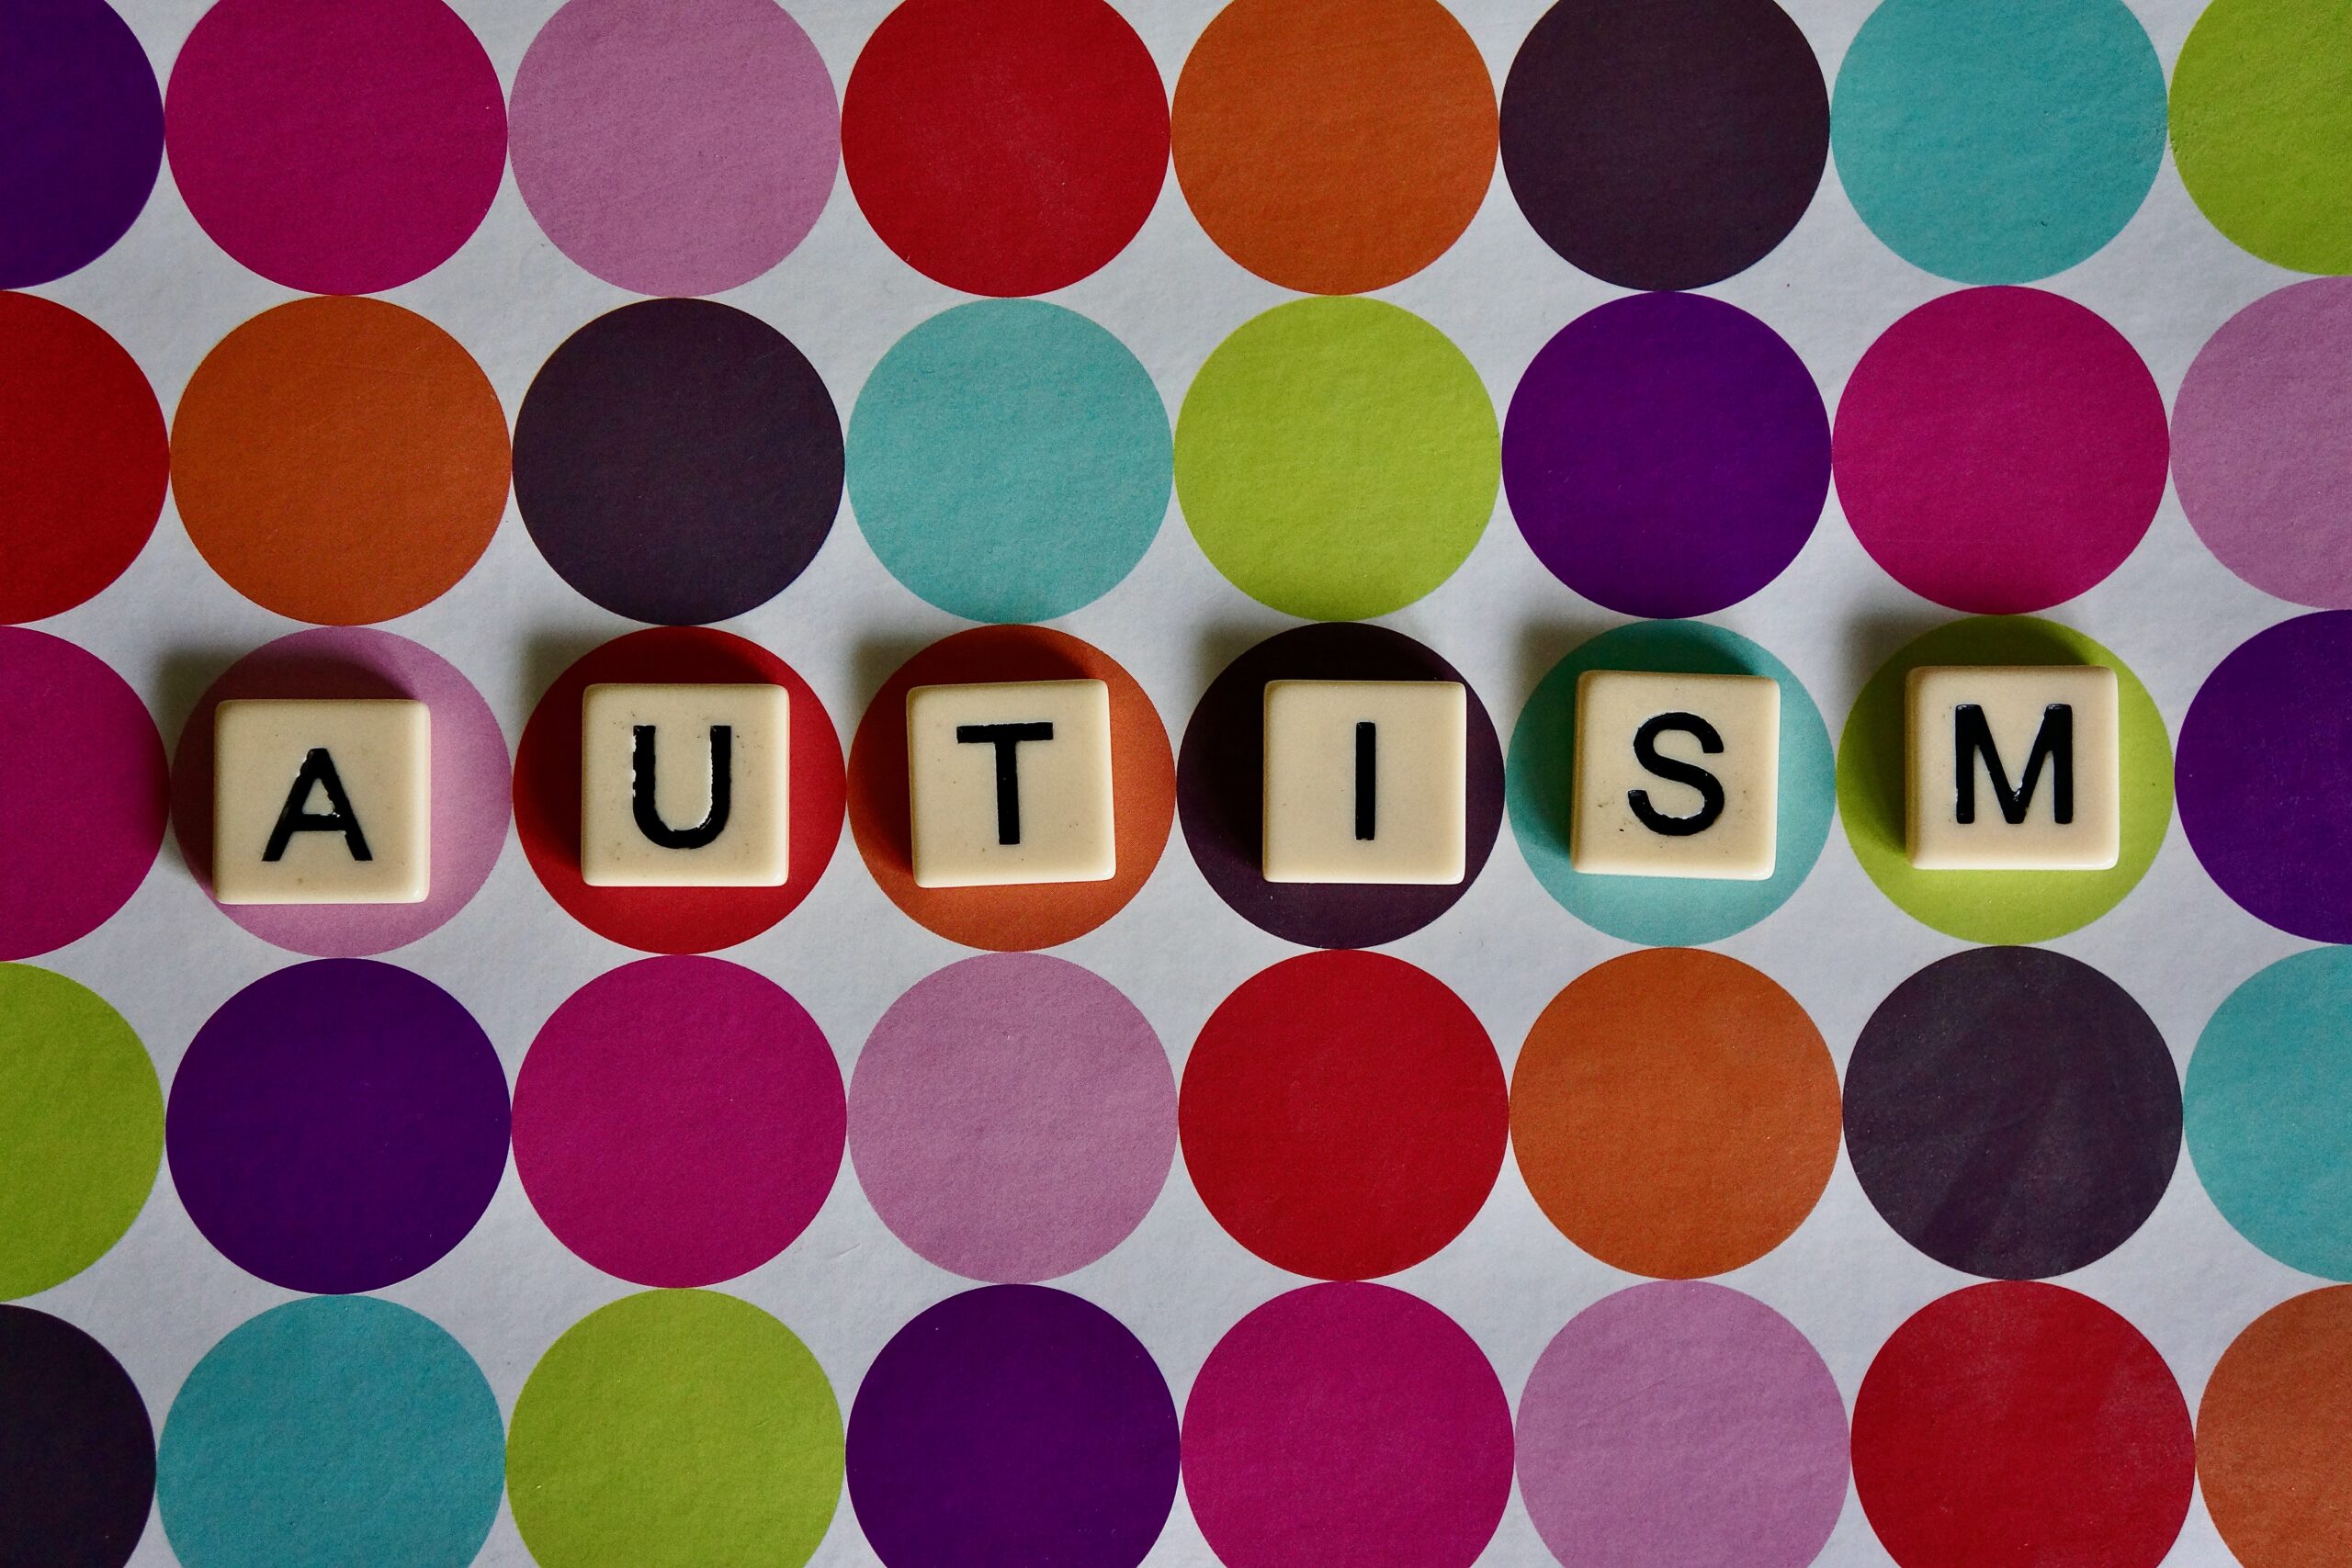 tiles spelling the word autism on colourful dots background